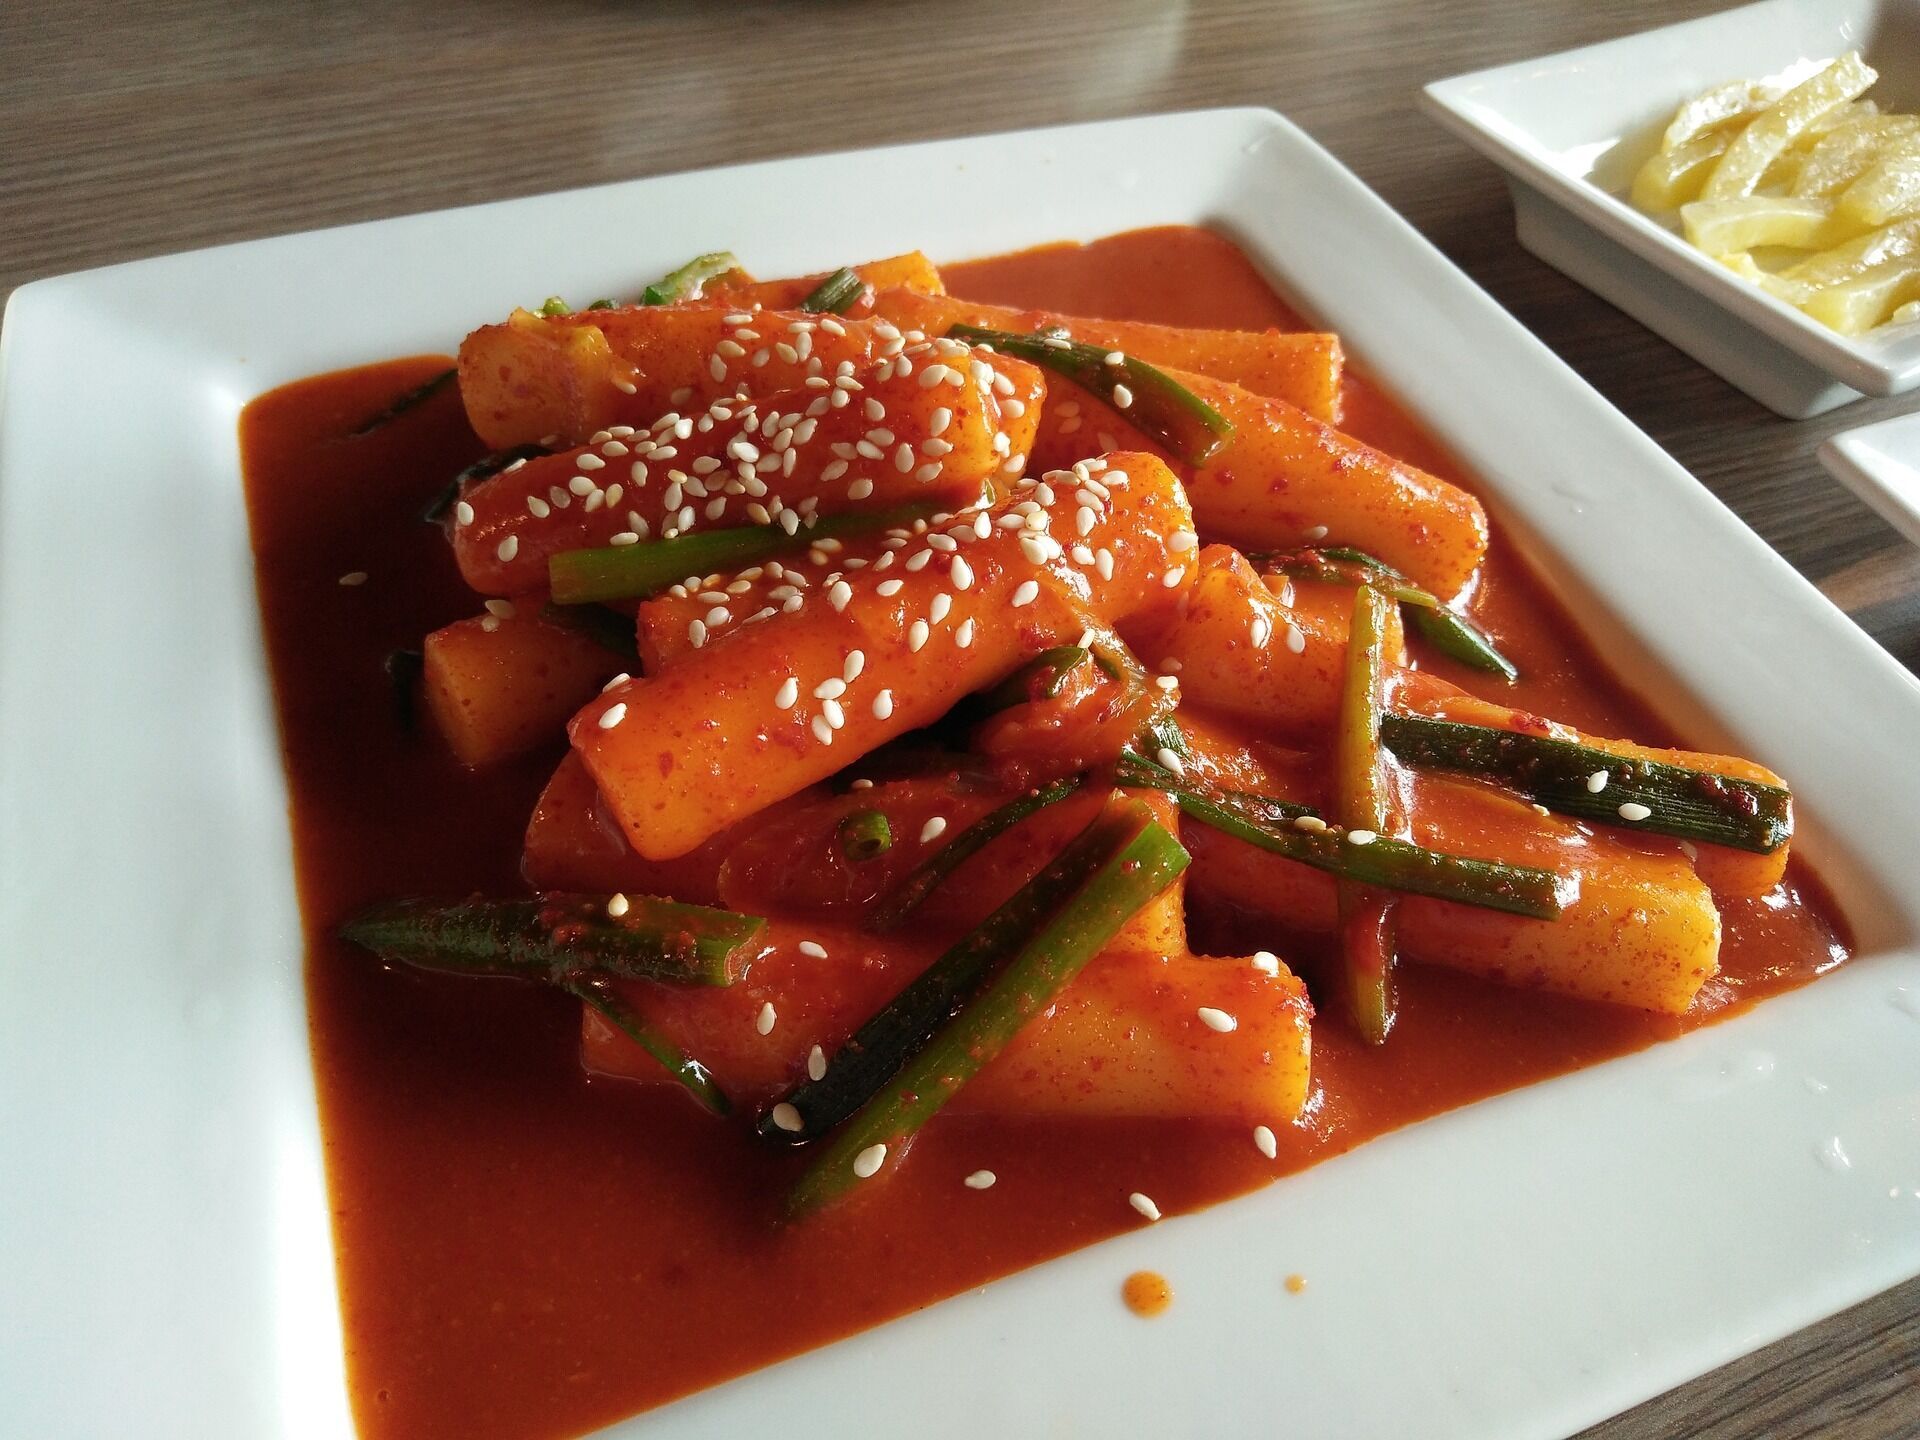 What to eat for vegetarians in South Korea: tips and suggestions